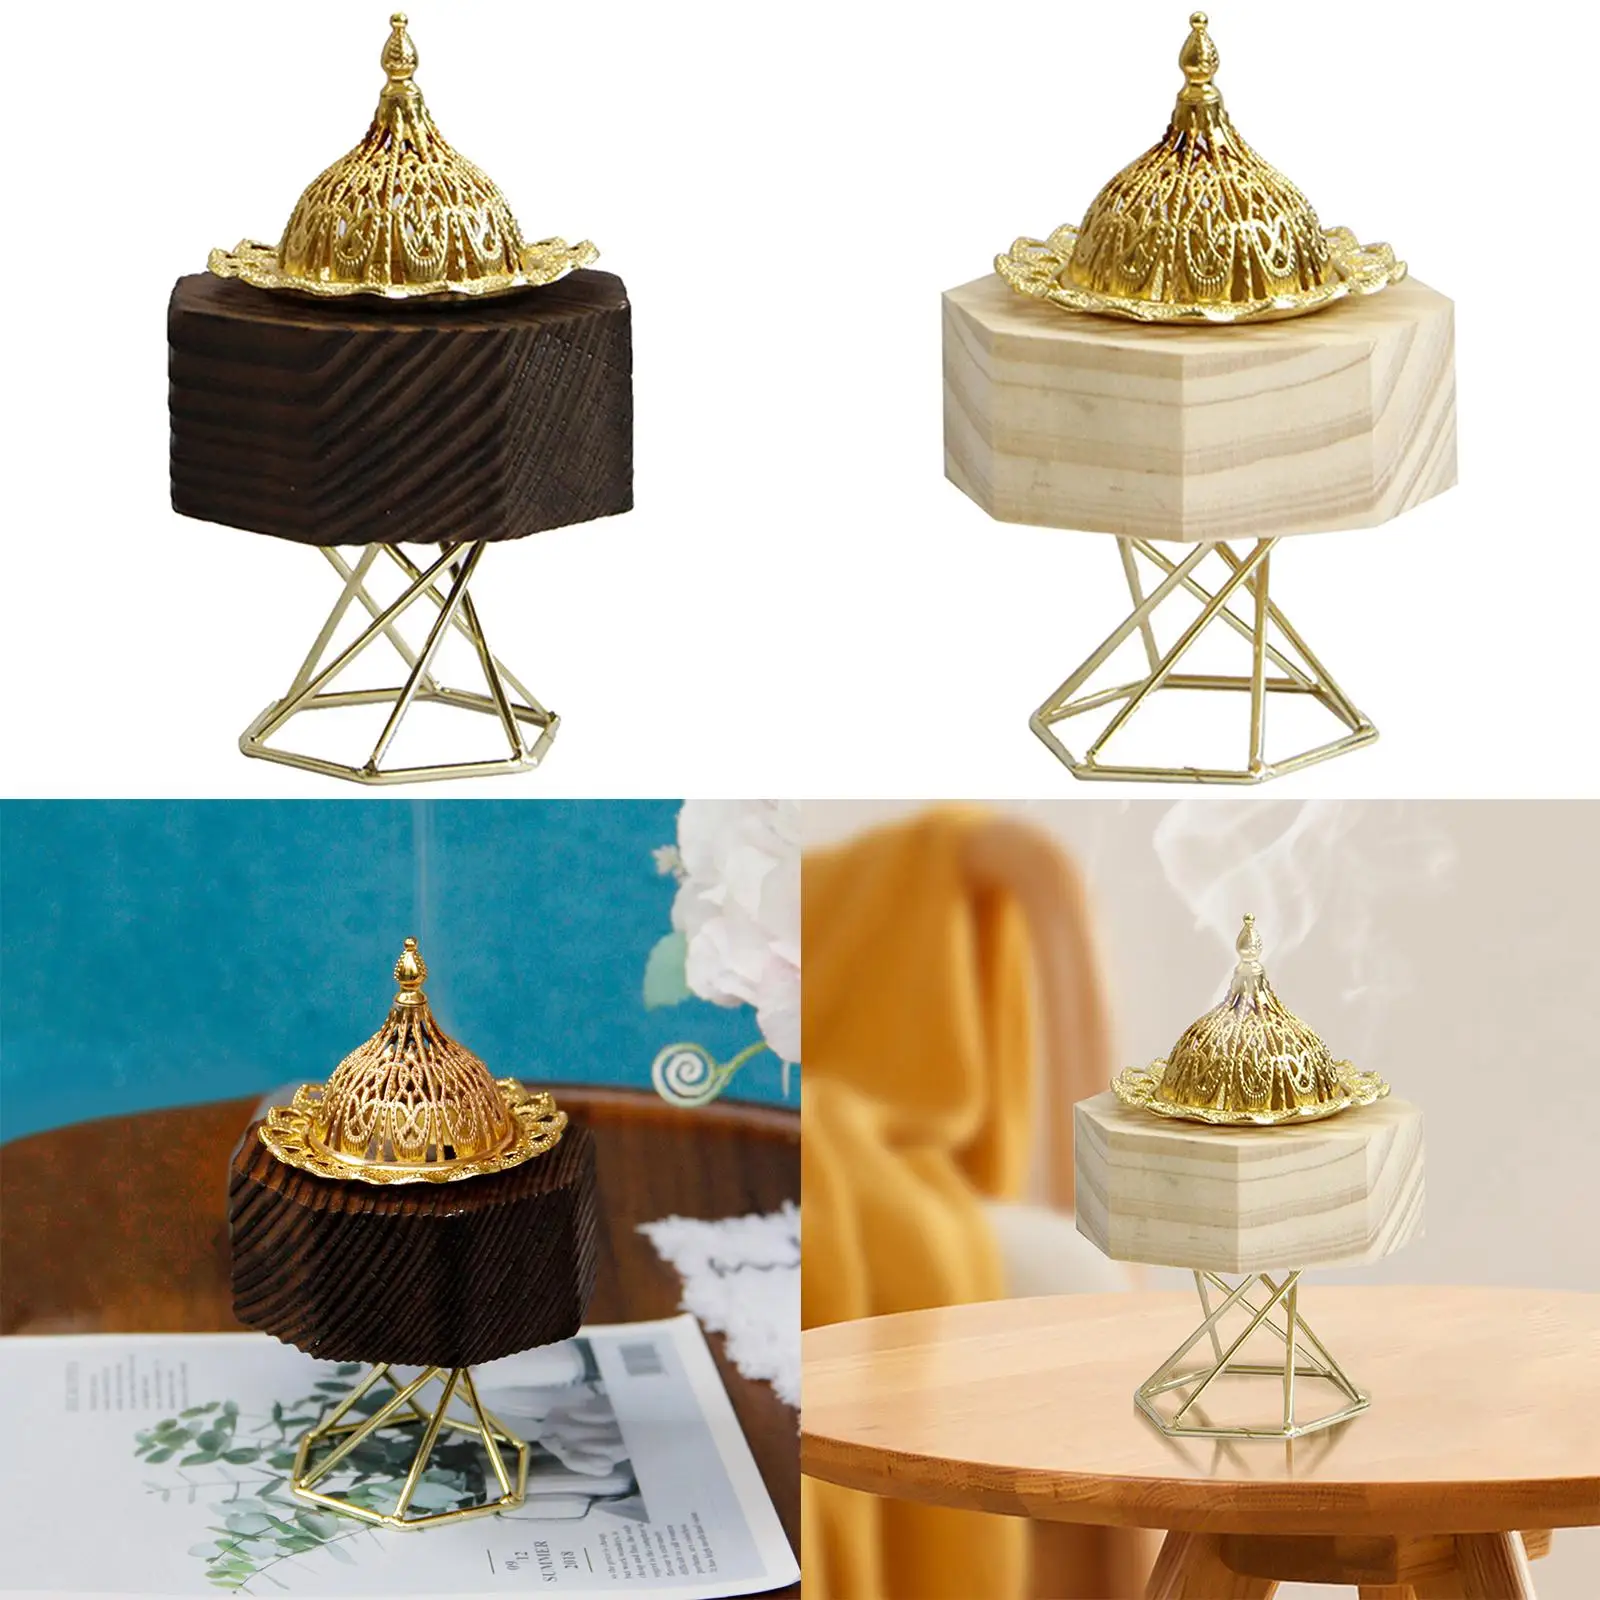 Incense Burner Portable Middle East Arab Decoration for Study Church Office images - 6